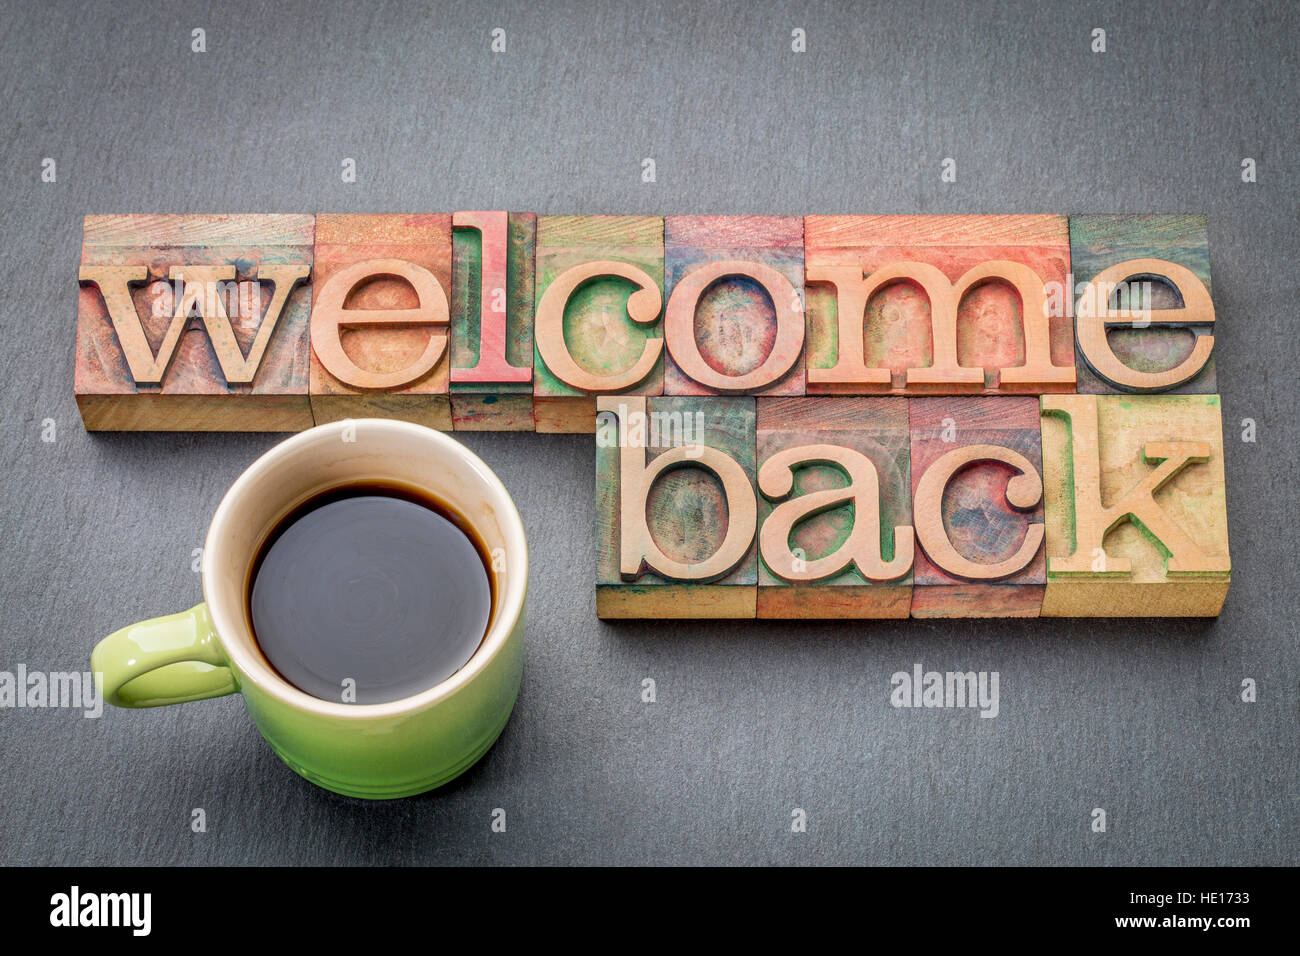 welcome-back-sign-text-in-letterpress-wood-type-with-a-cup-of-coffee-HE1733.jpg